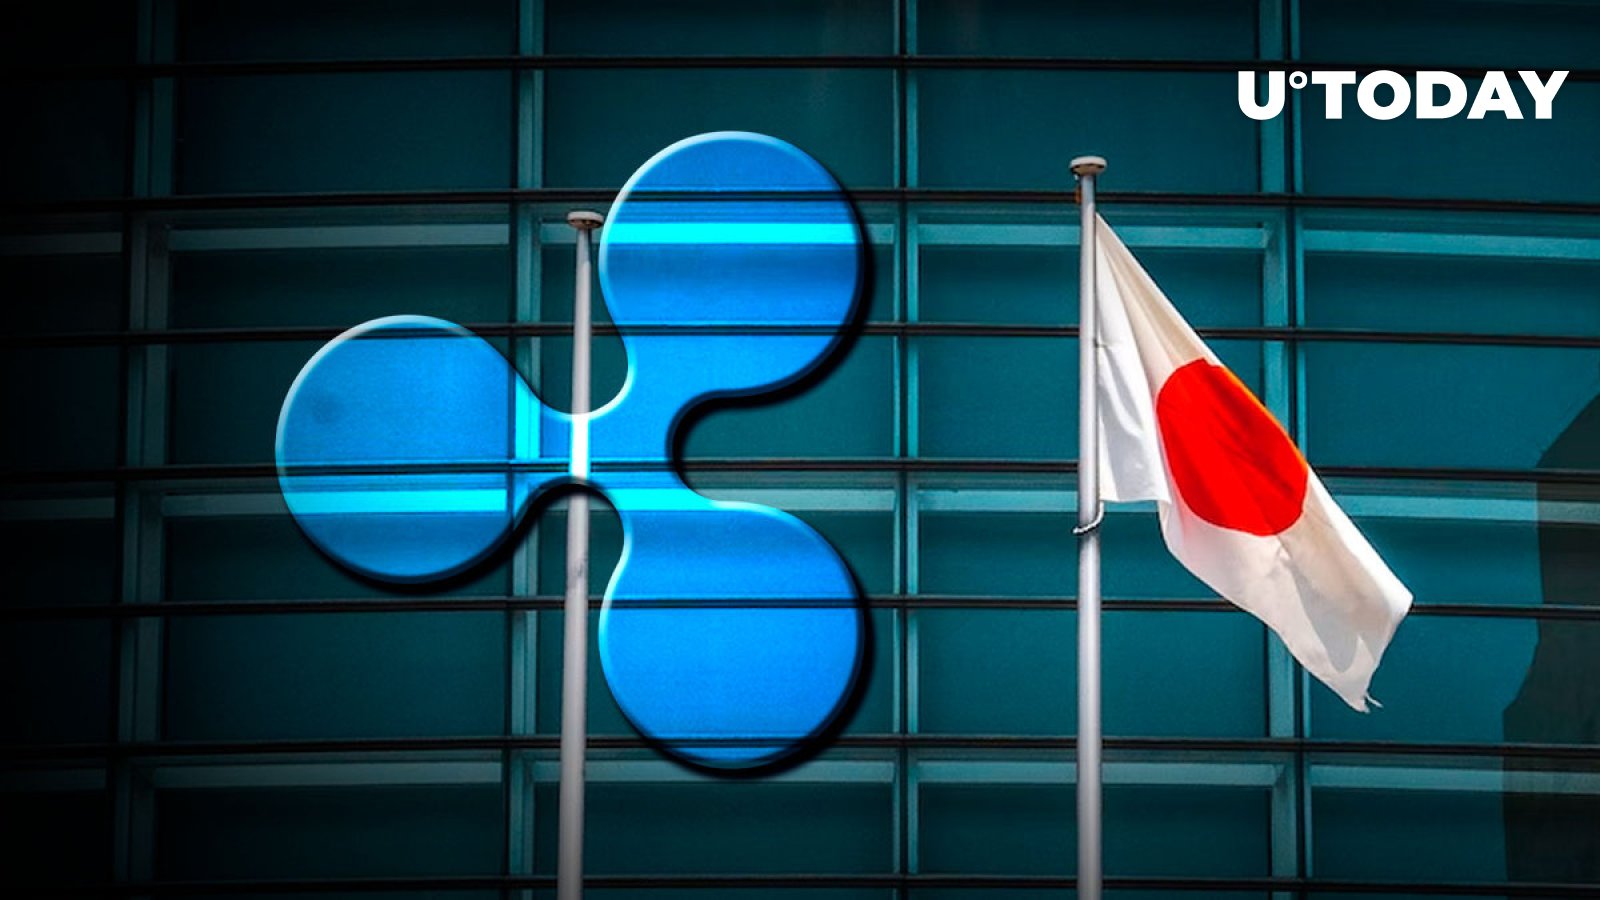 Ripple: City Mayor in Japan Visits To Discuss Crypto Adoption